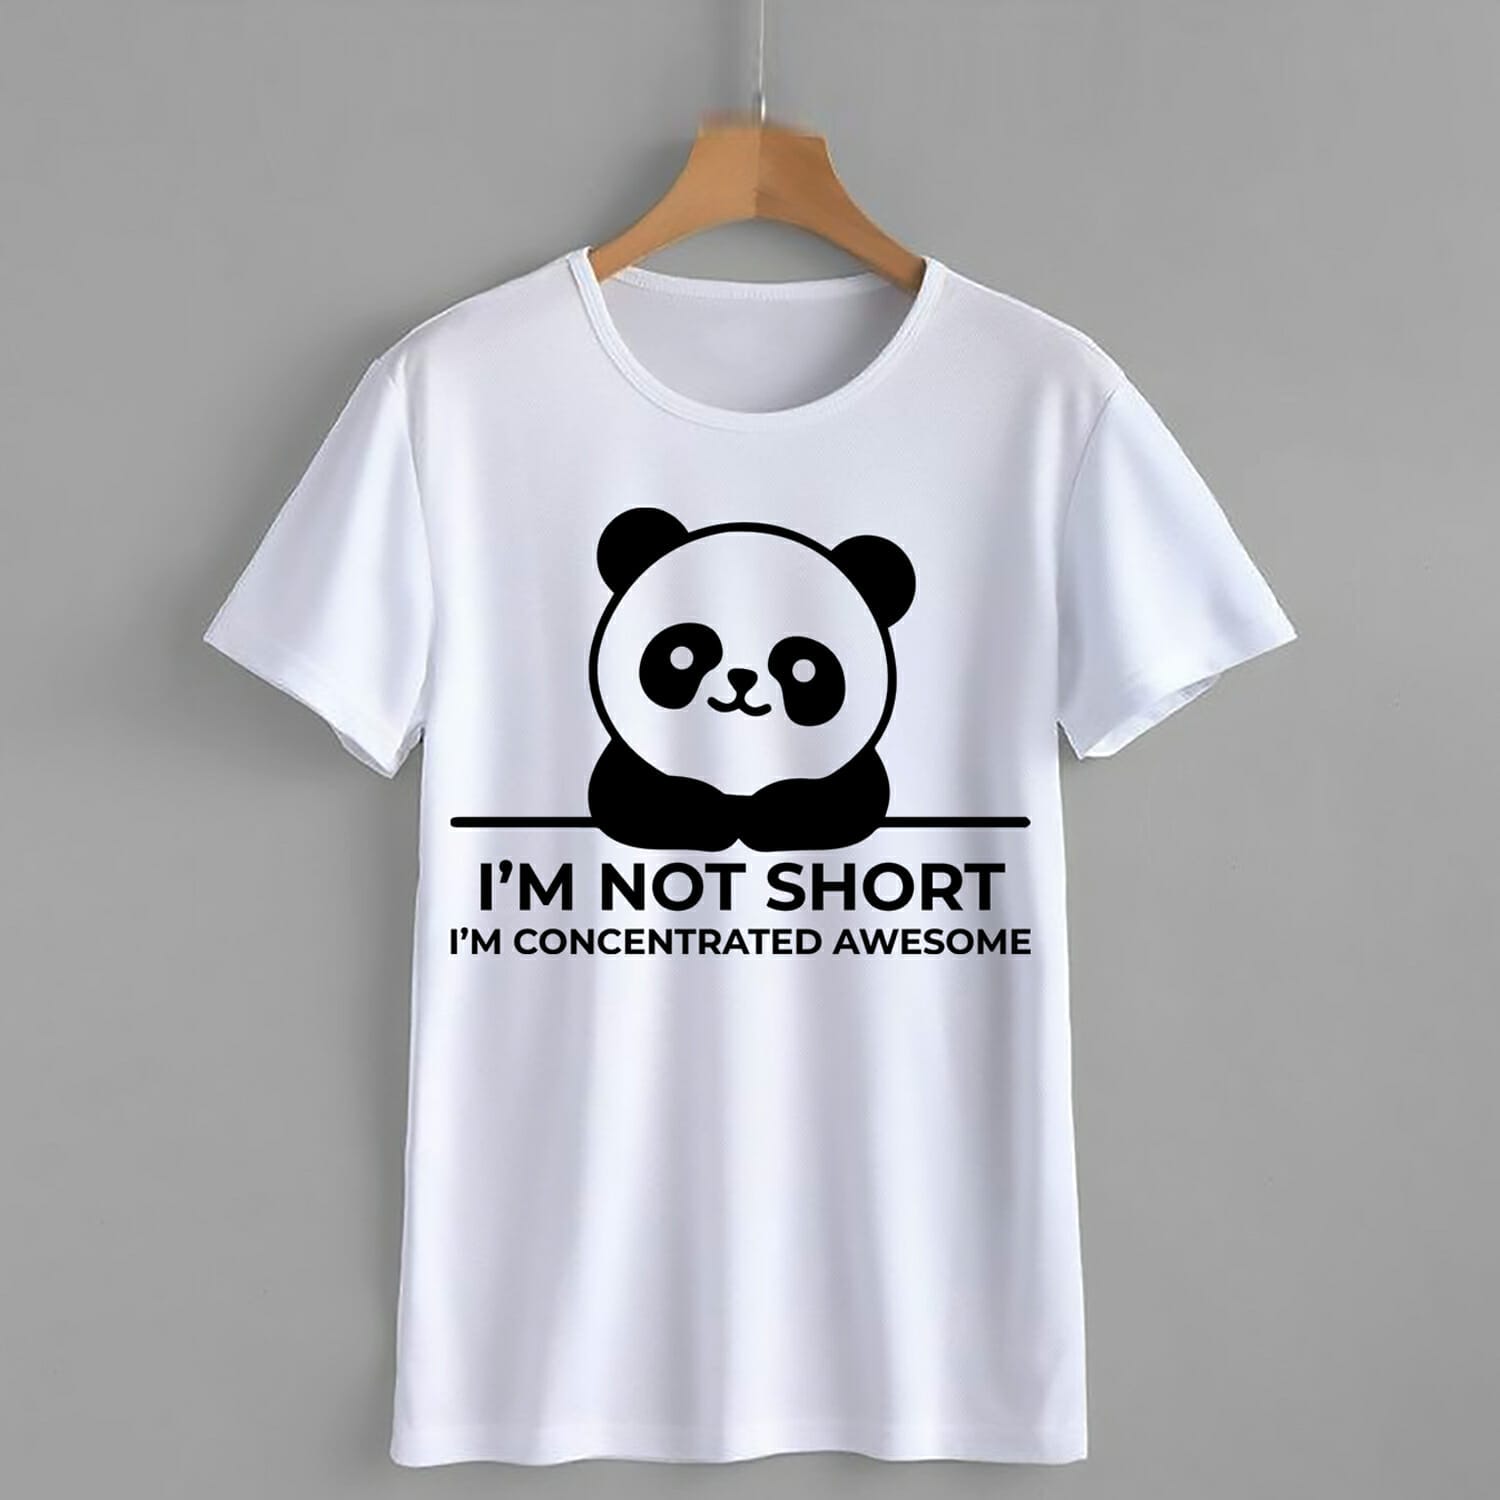 I'm Not Short I'm Concentrated Awesome T-Shirt Design